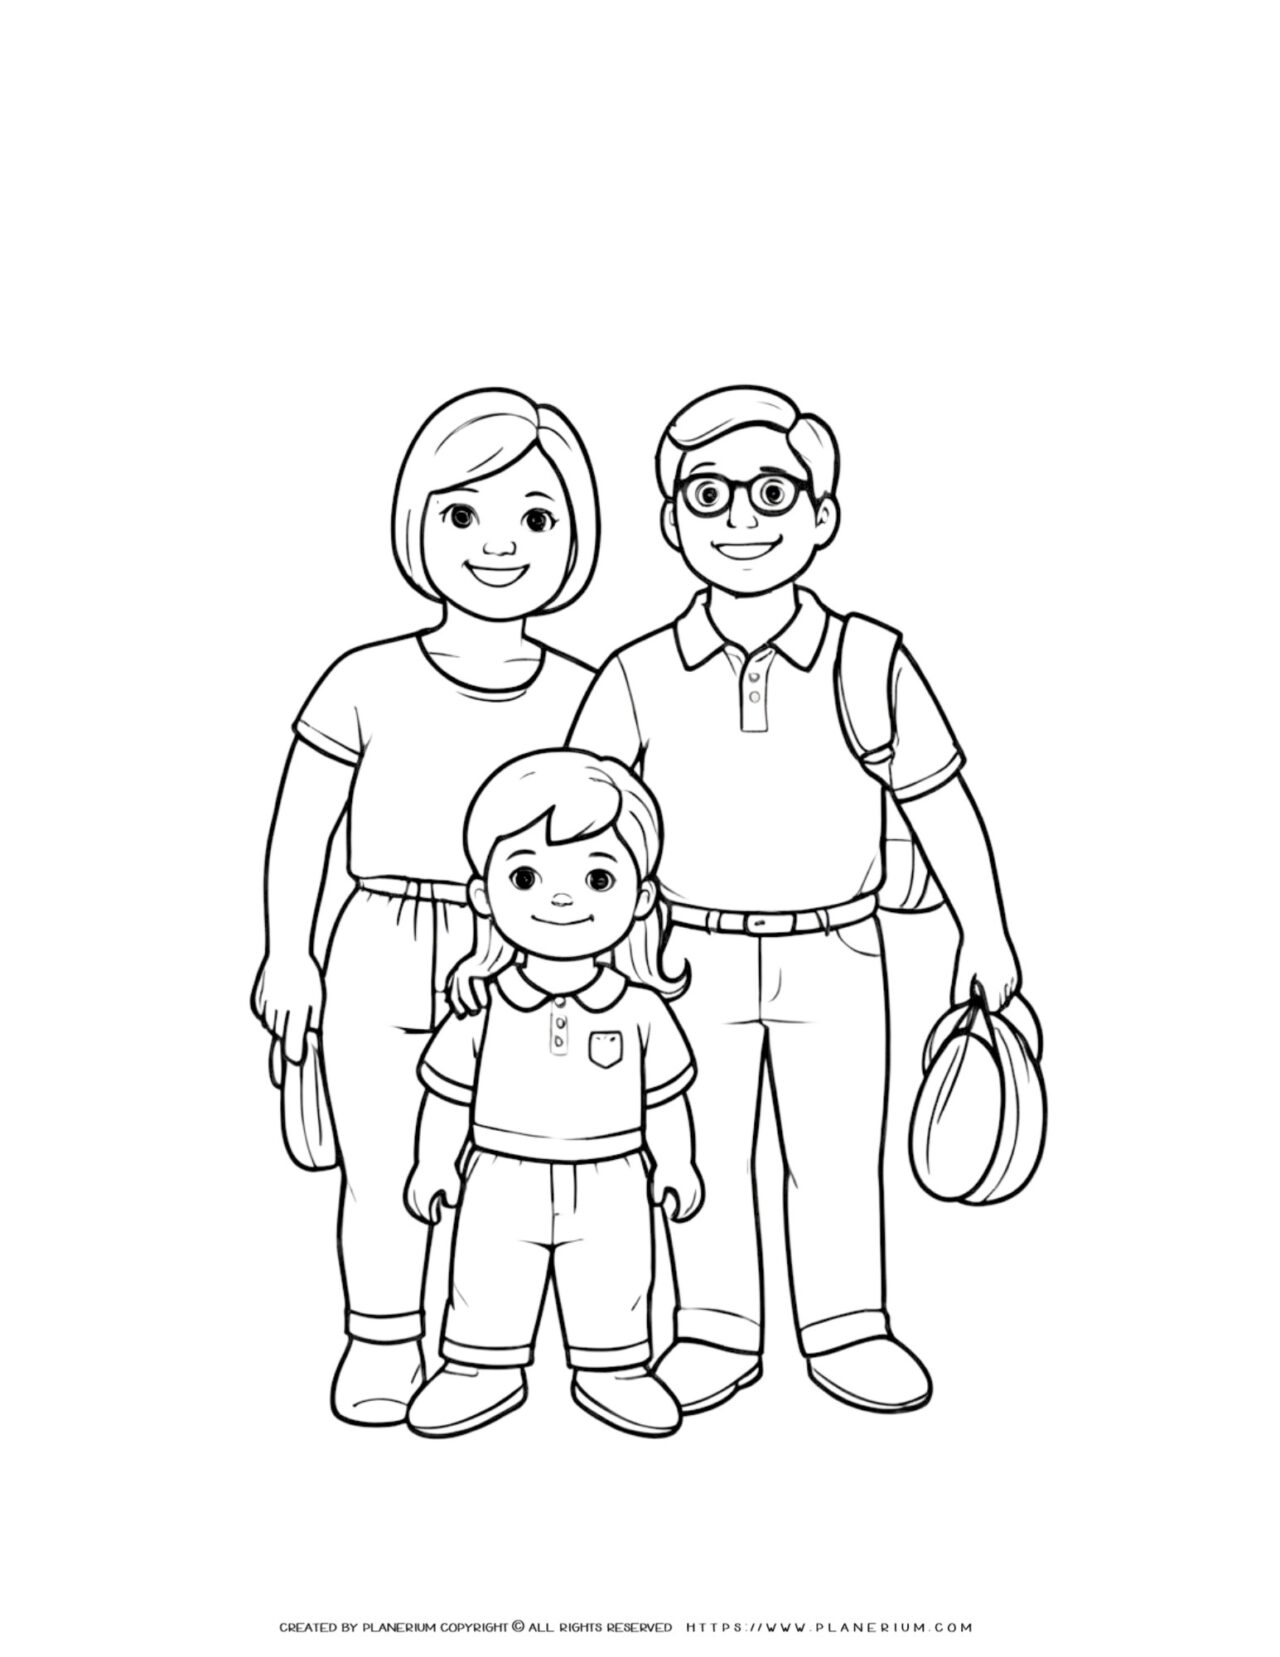 Happy-American-Family-Coloring-Page-with-Two-Parents-and-One-Little-Girl